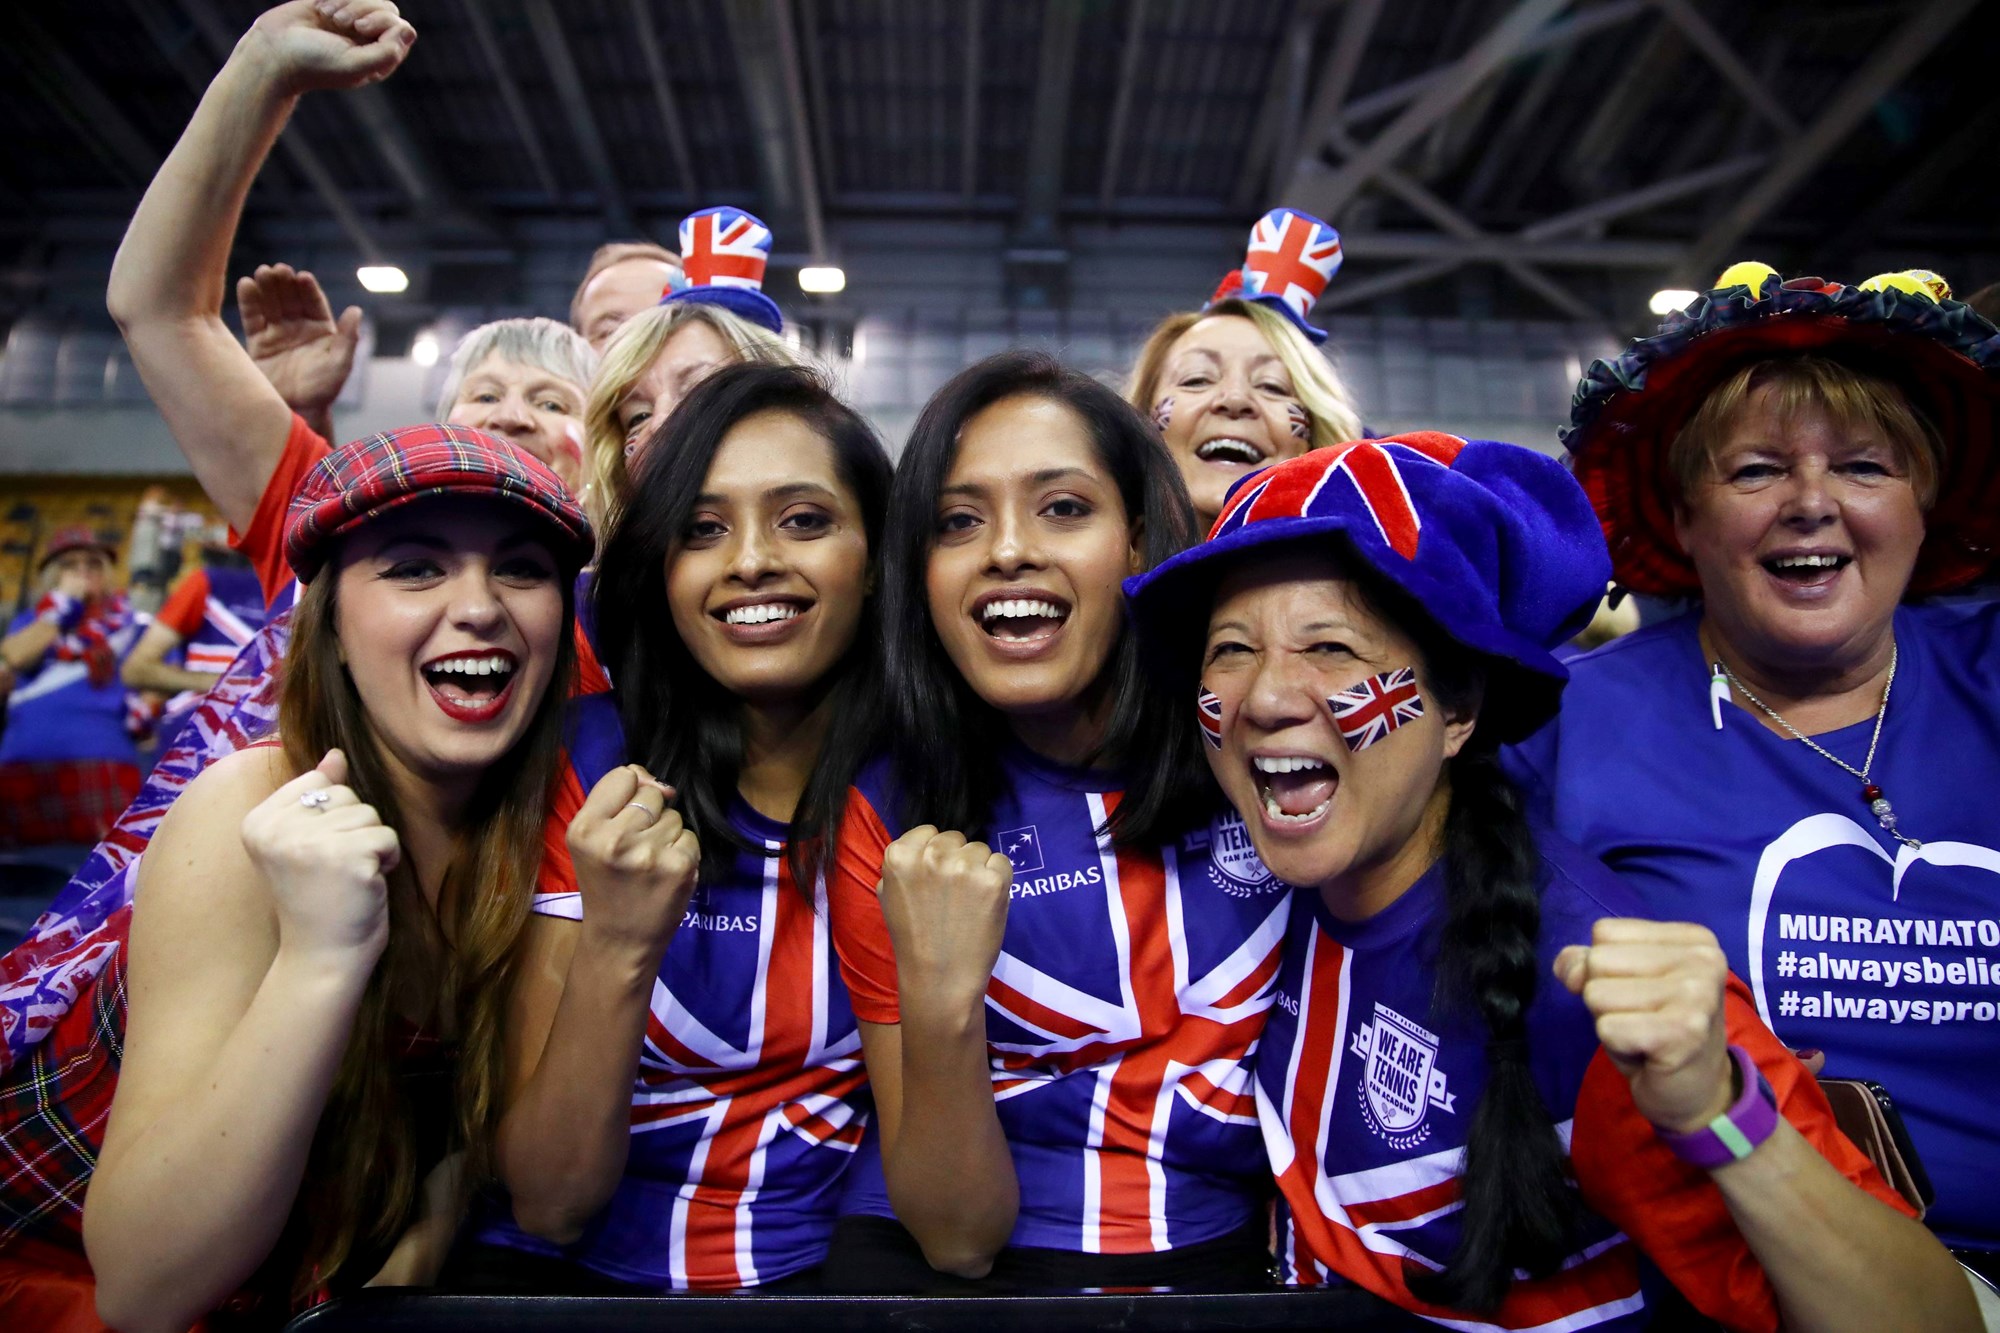 British fans cheering on the team at the 2018 Davis Cup in Glasgow